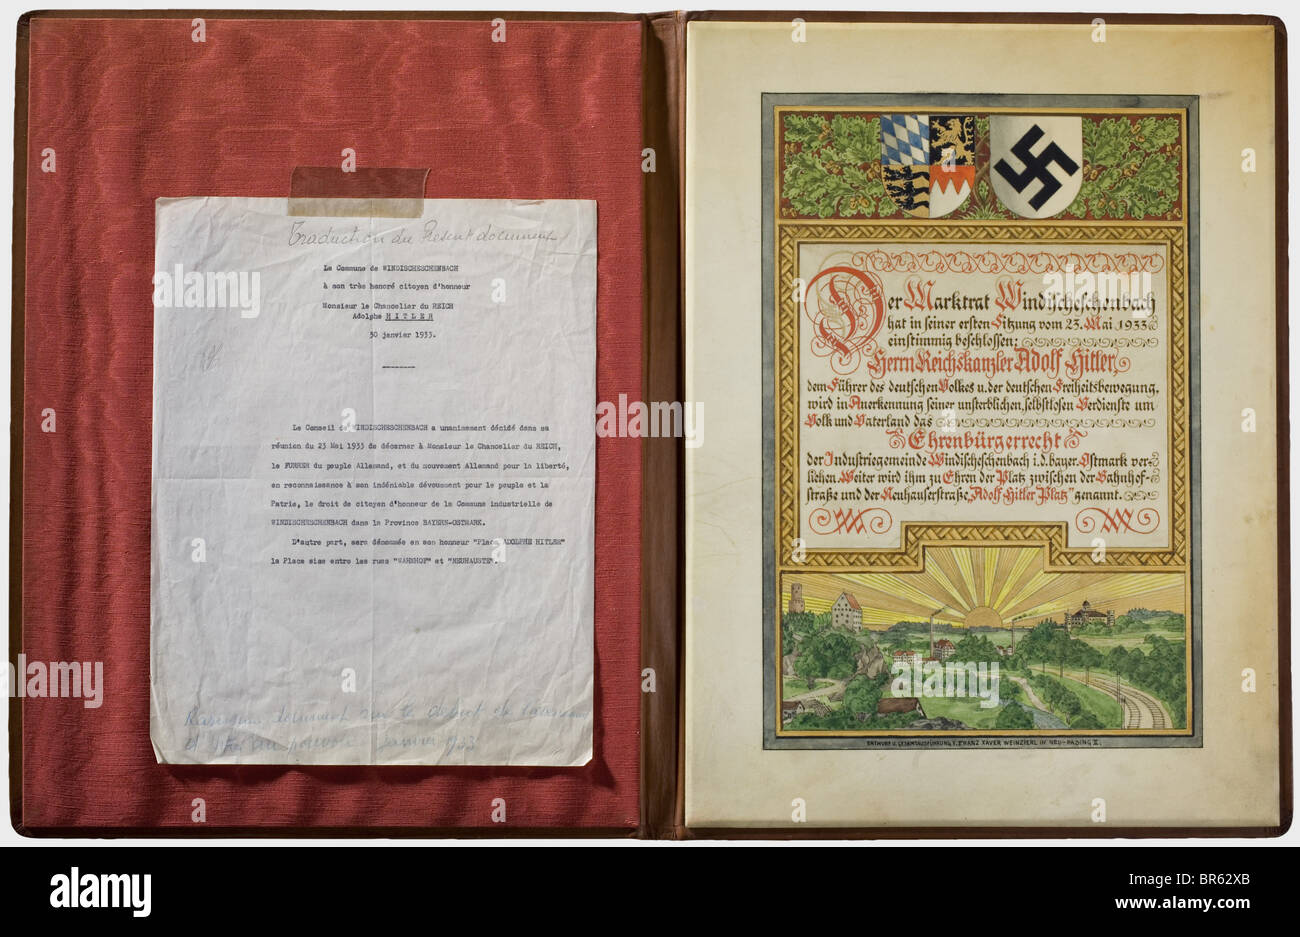 Adolf Hitler - a certificate of honorary citizenship, and naming of the main square in 'Adolf Hitler Platz' to honour the Reich Chancellor Adolf Hitler, by the municipality of Windischeschenbach (Bavarian Ostmark), dated 23 May 1933. Designed in fine hand-painting with a depiction of the village, Bavarian coat of arms and swastika. Calligraphic text. In a gold-stamped leather folder with city coat of arms. Dimensions 40 x 30 cm. Today the town is known especially for the Eschenbach porcelain and the continental deep drilling to a depth of nearly 10.000 m. histo, Stock Photo